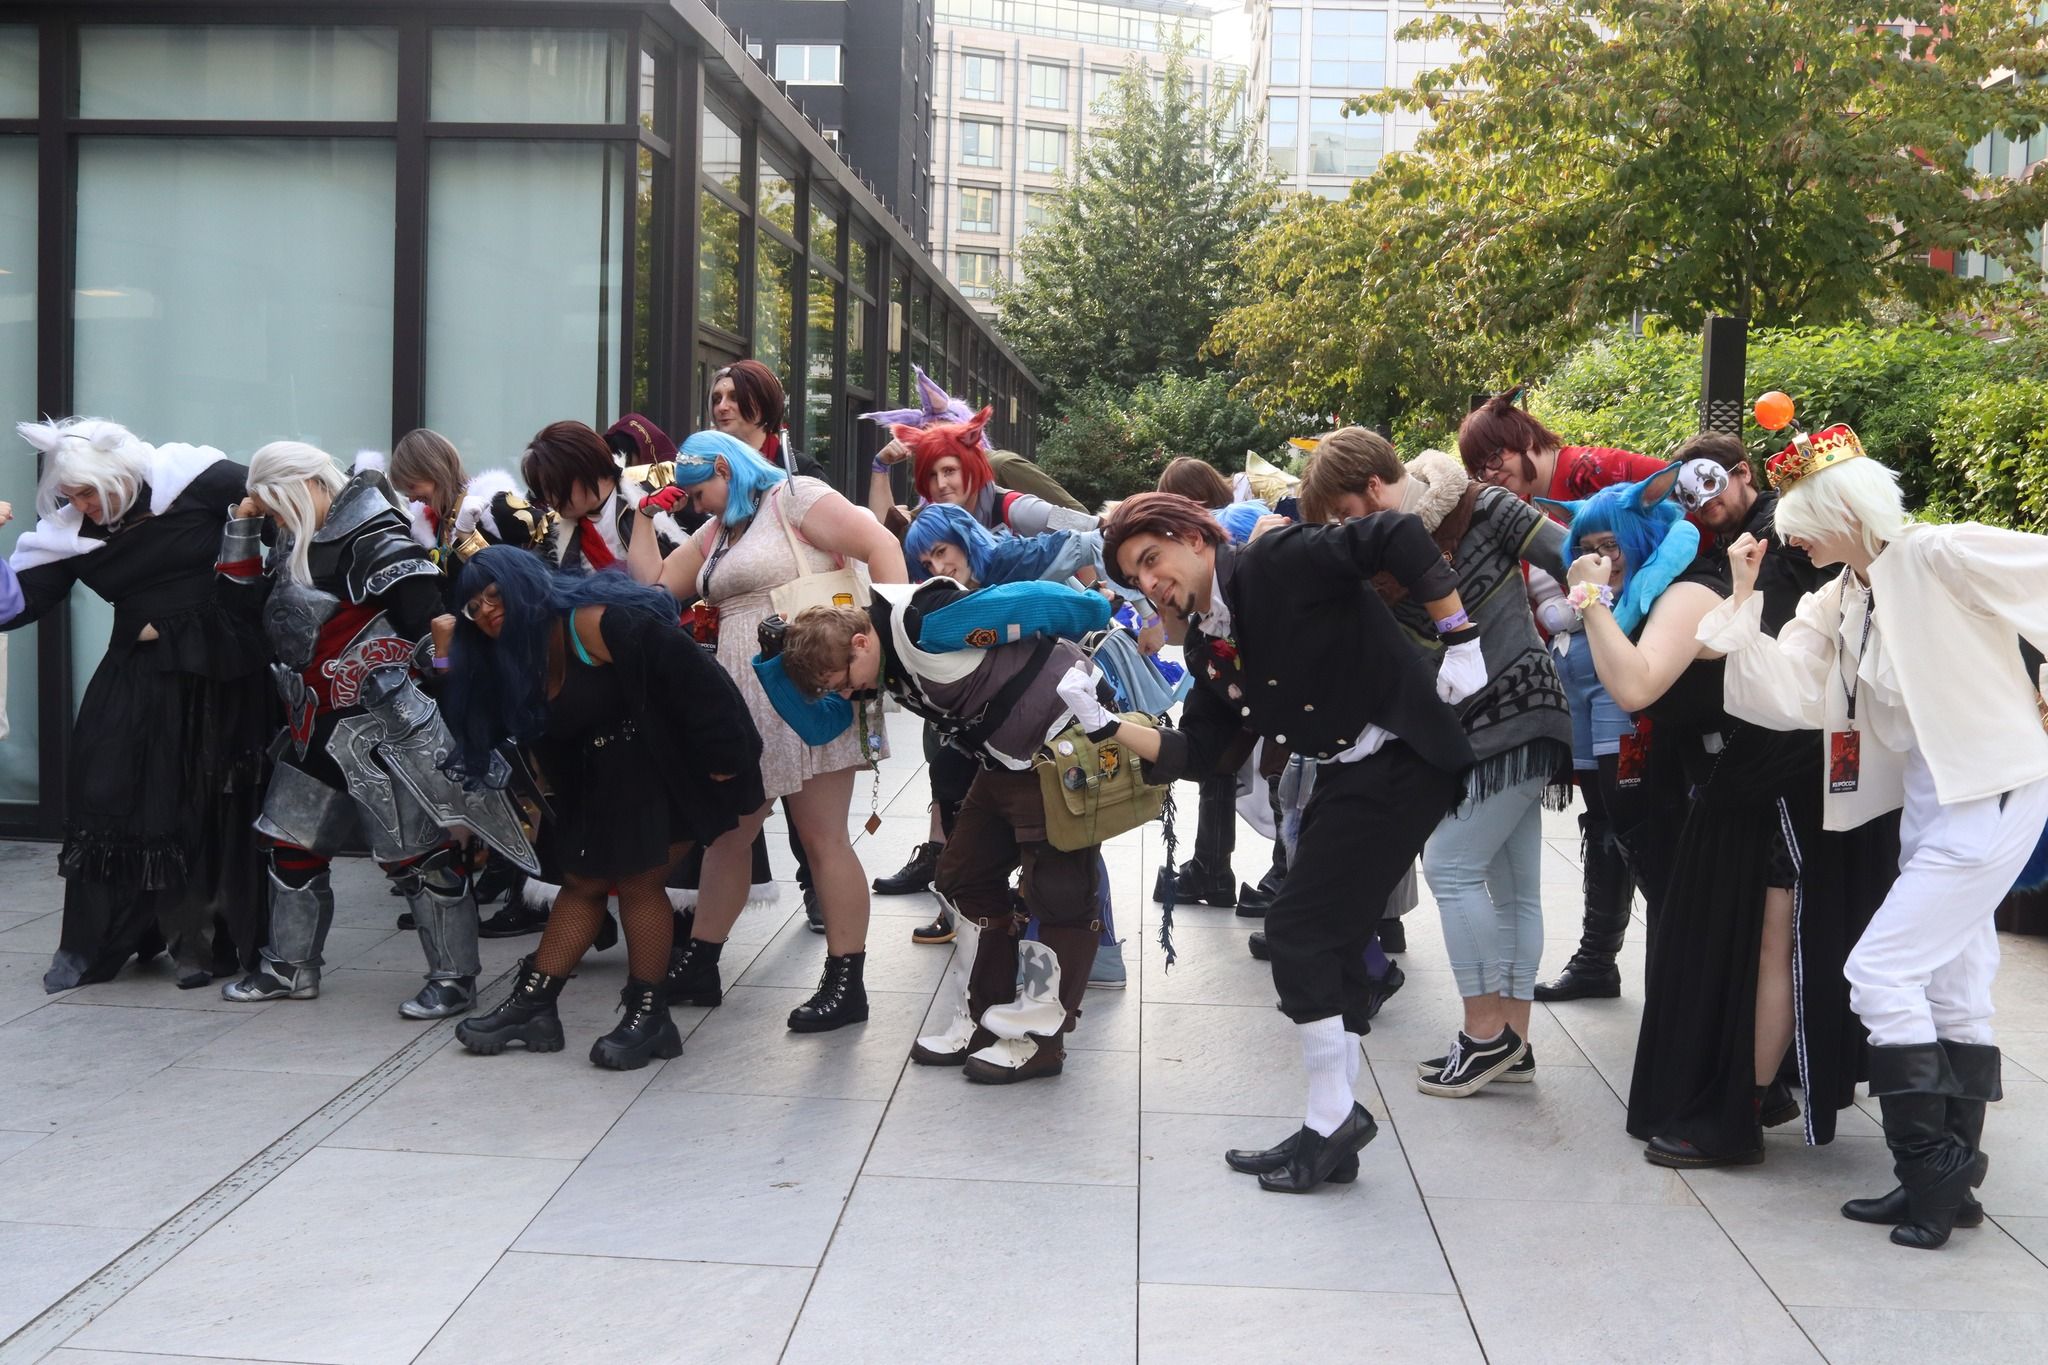 A bunch of Final Fantasy 14 cosplayers performing the manderville pose.